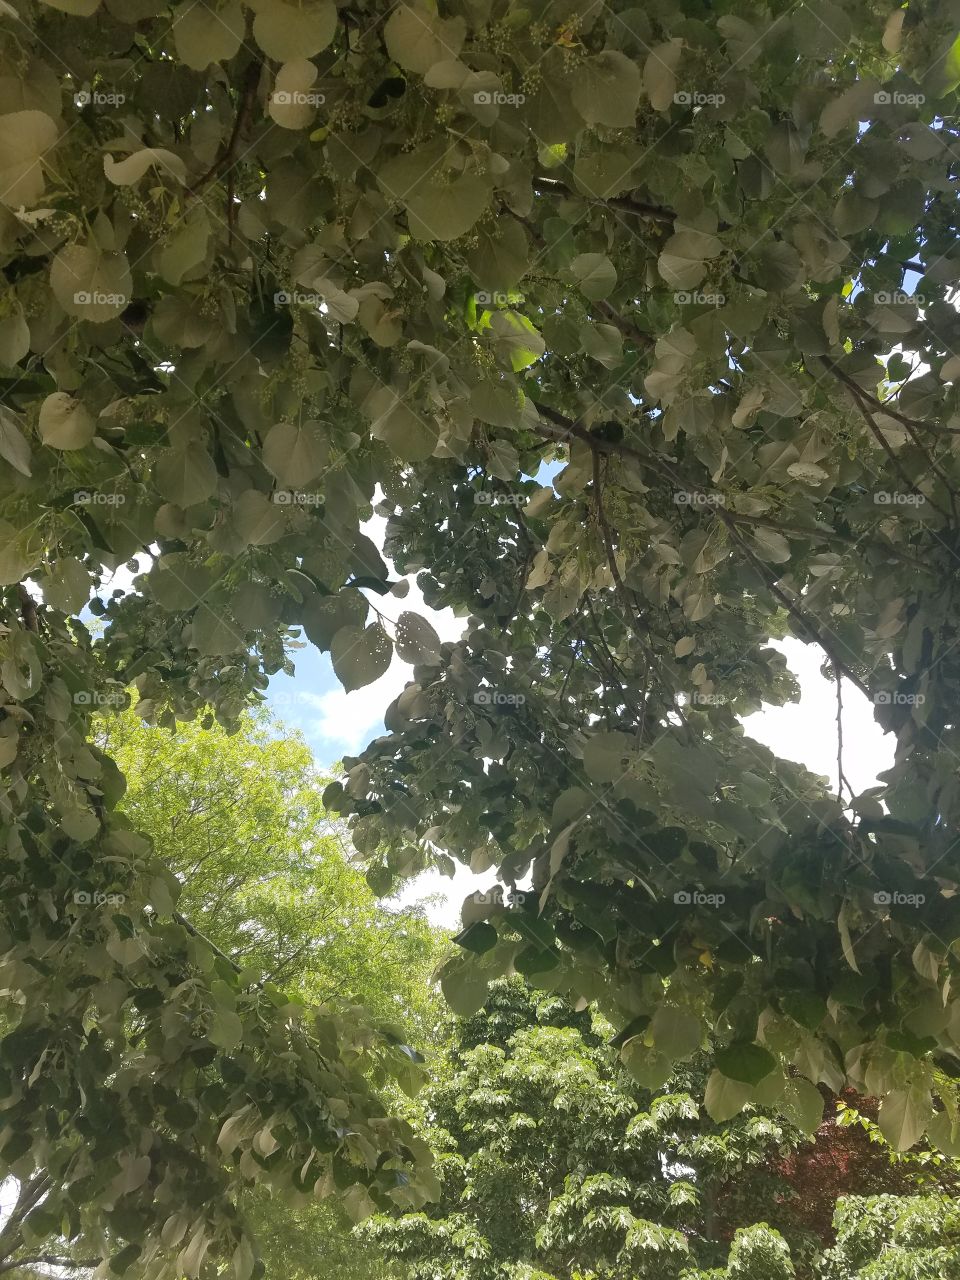 End of Spring in Bayside Queens, NYC. Beautiful Sunny Day. Looking through the Trees. Captured on Android Phone - Galaxy S7. May 2017.